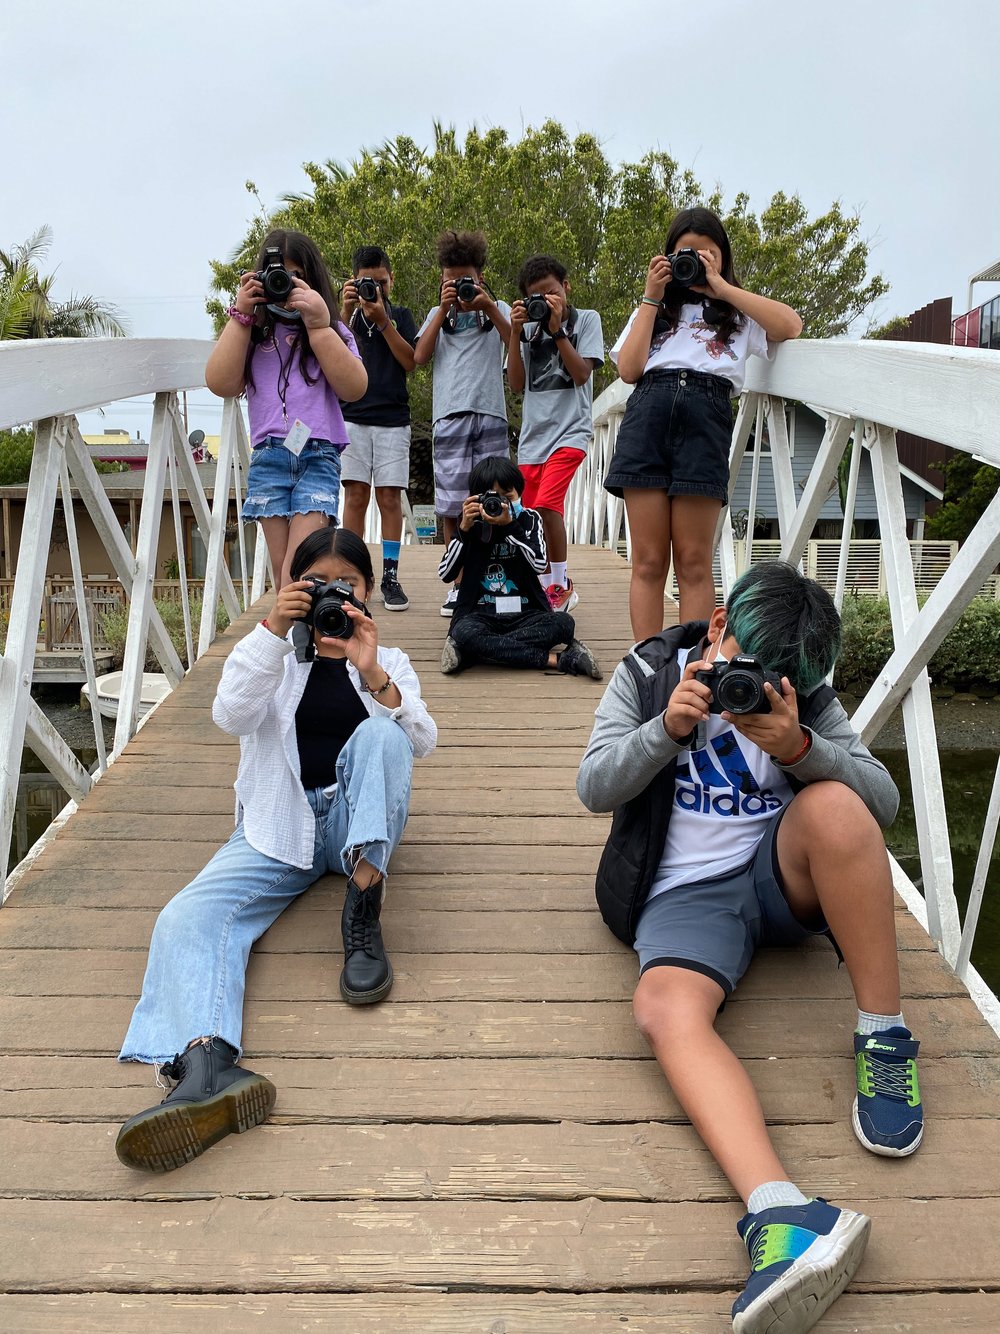  Say cheese! Photography students take shots at the Venice Canals. 